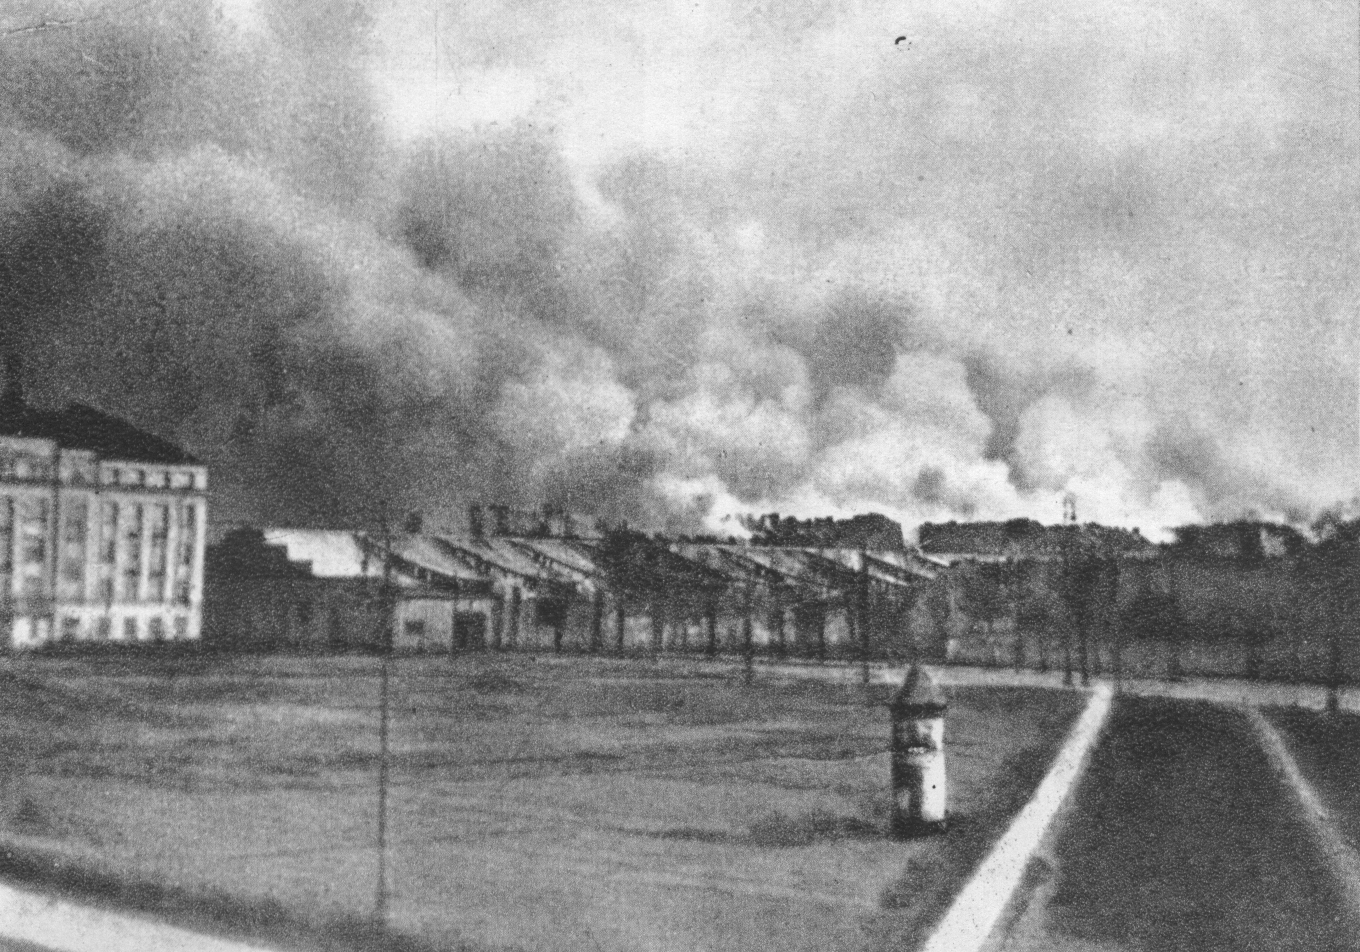 Burning buildings in the Warsaw Ghetto, seen from Zoliborz district, Poland, late Apr 1943